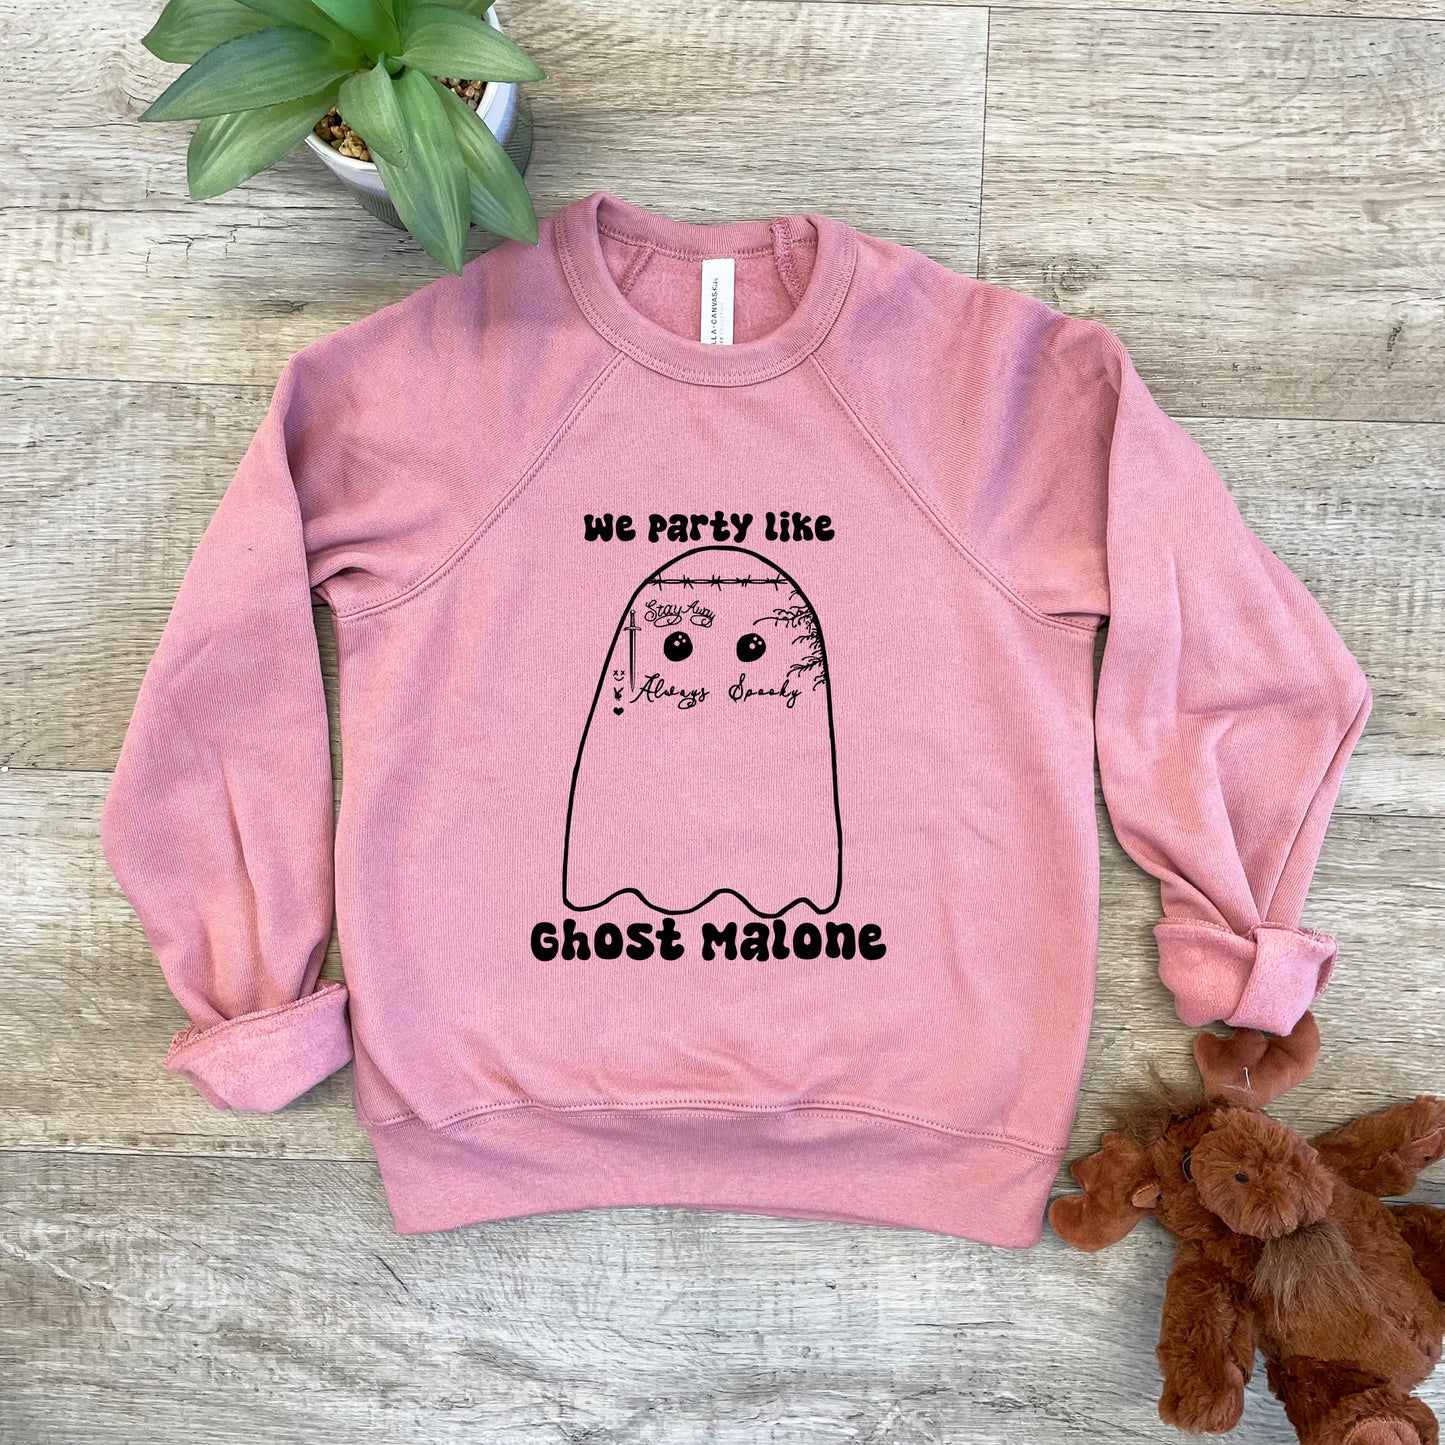 a pink sweatshirt that says we party like ghost nation